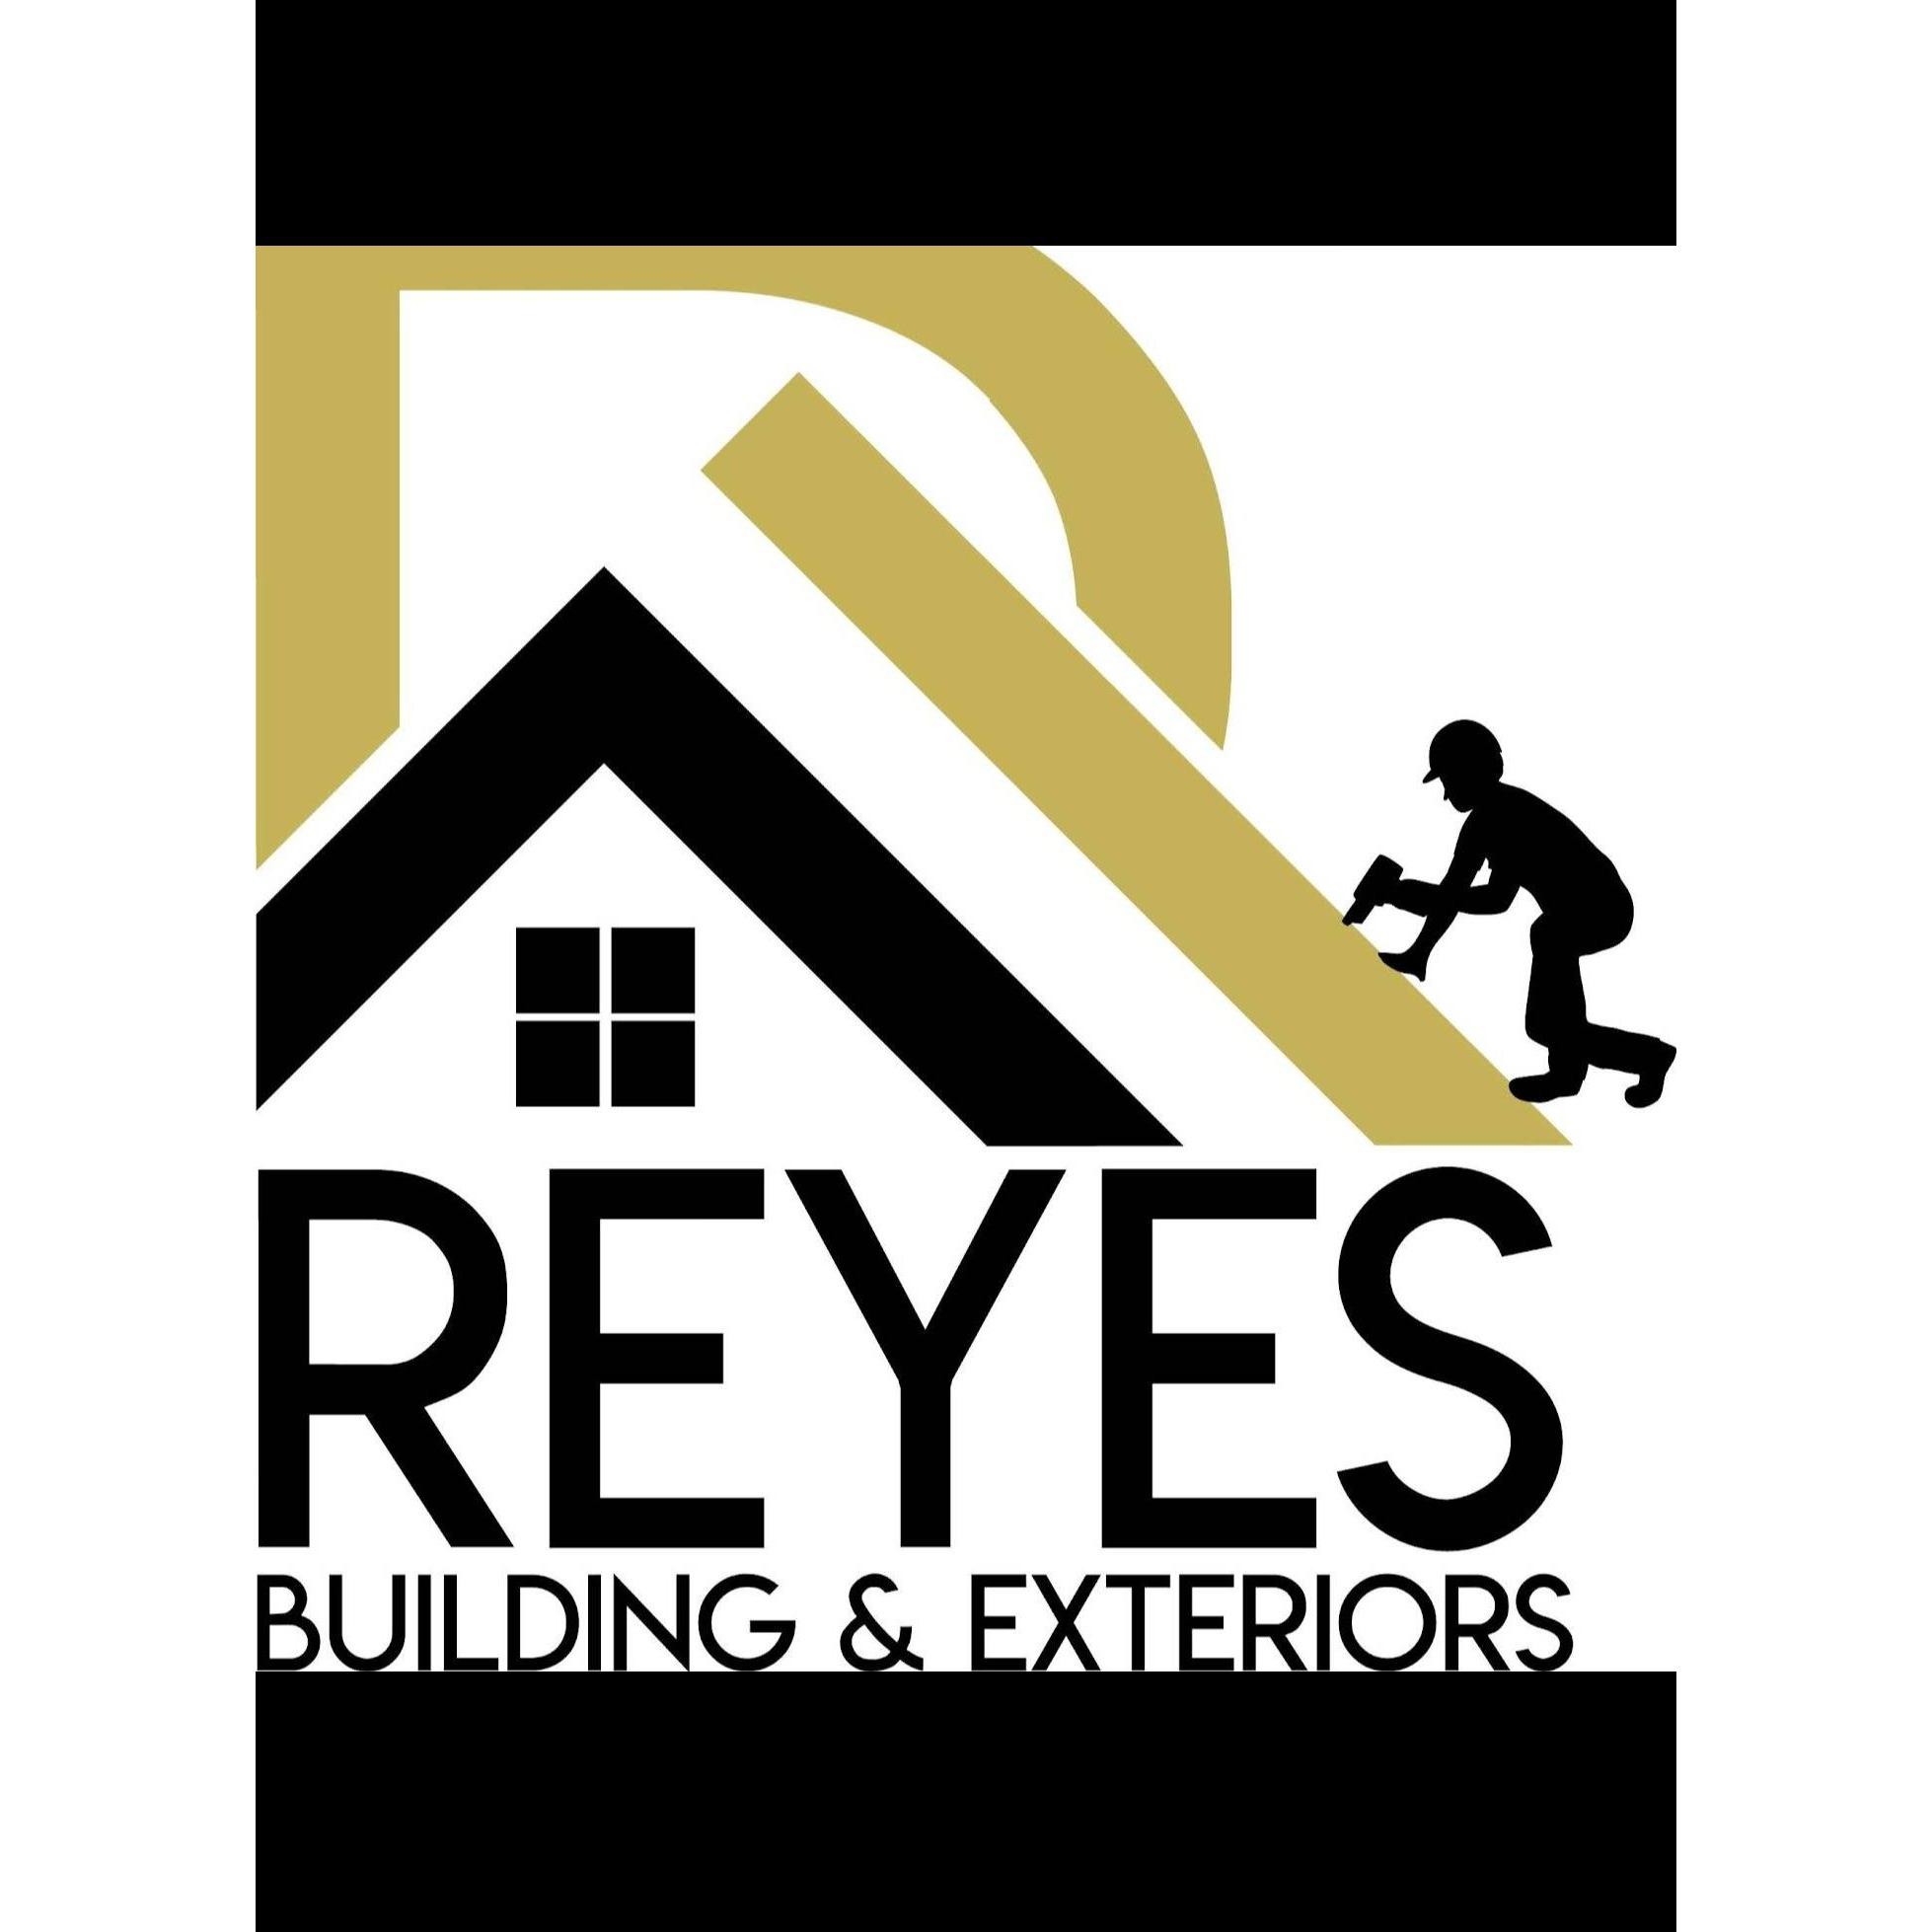 Reyes Roofing Building and Exteriors